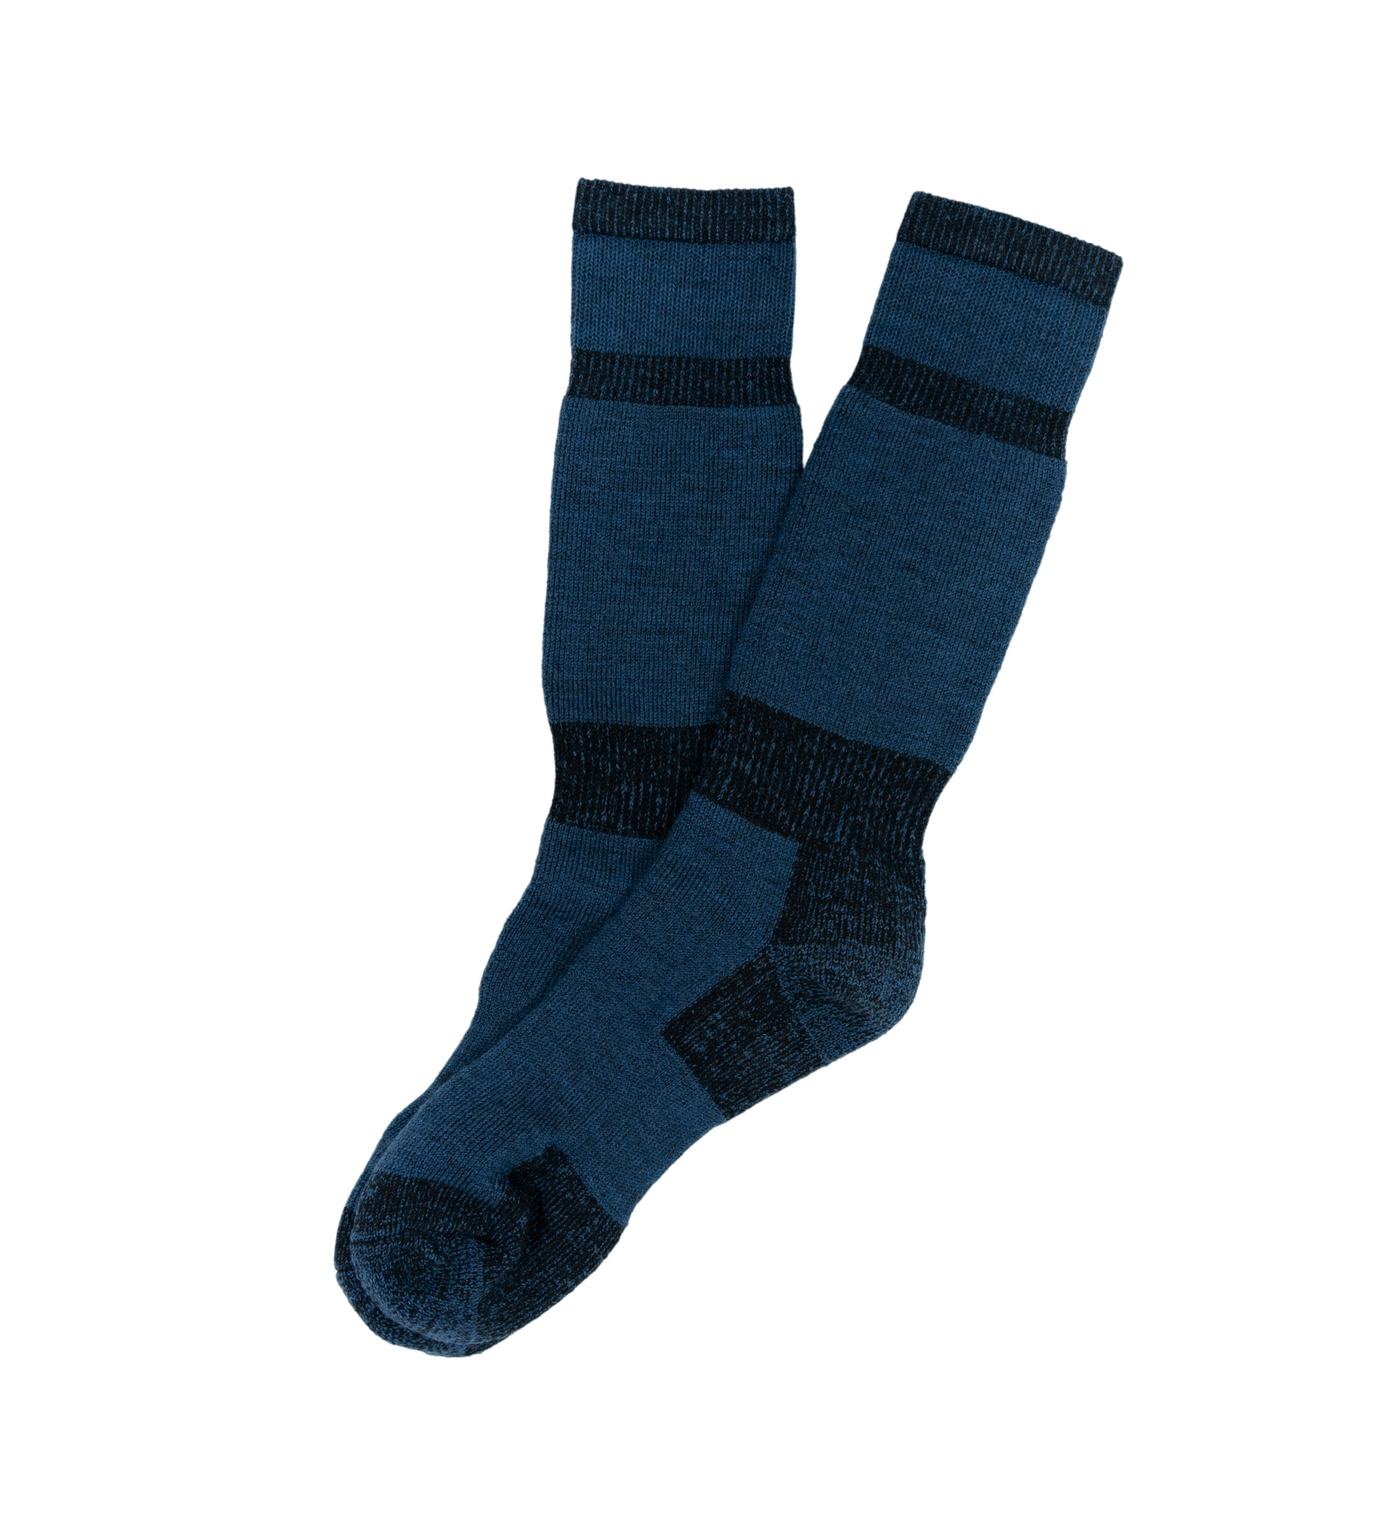 Merino wool socks The Rugged Beast - Canada Beast - Clothing Accessories - made in Canada- bear caps - casquette ours - casquette Canada